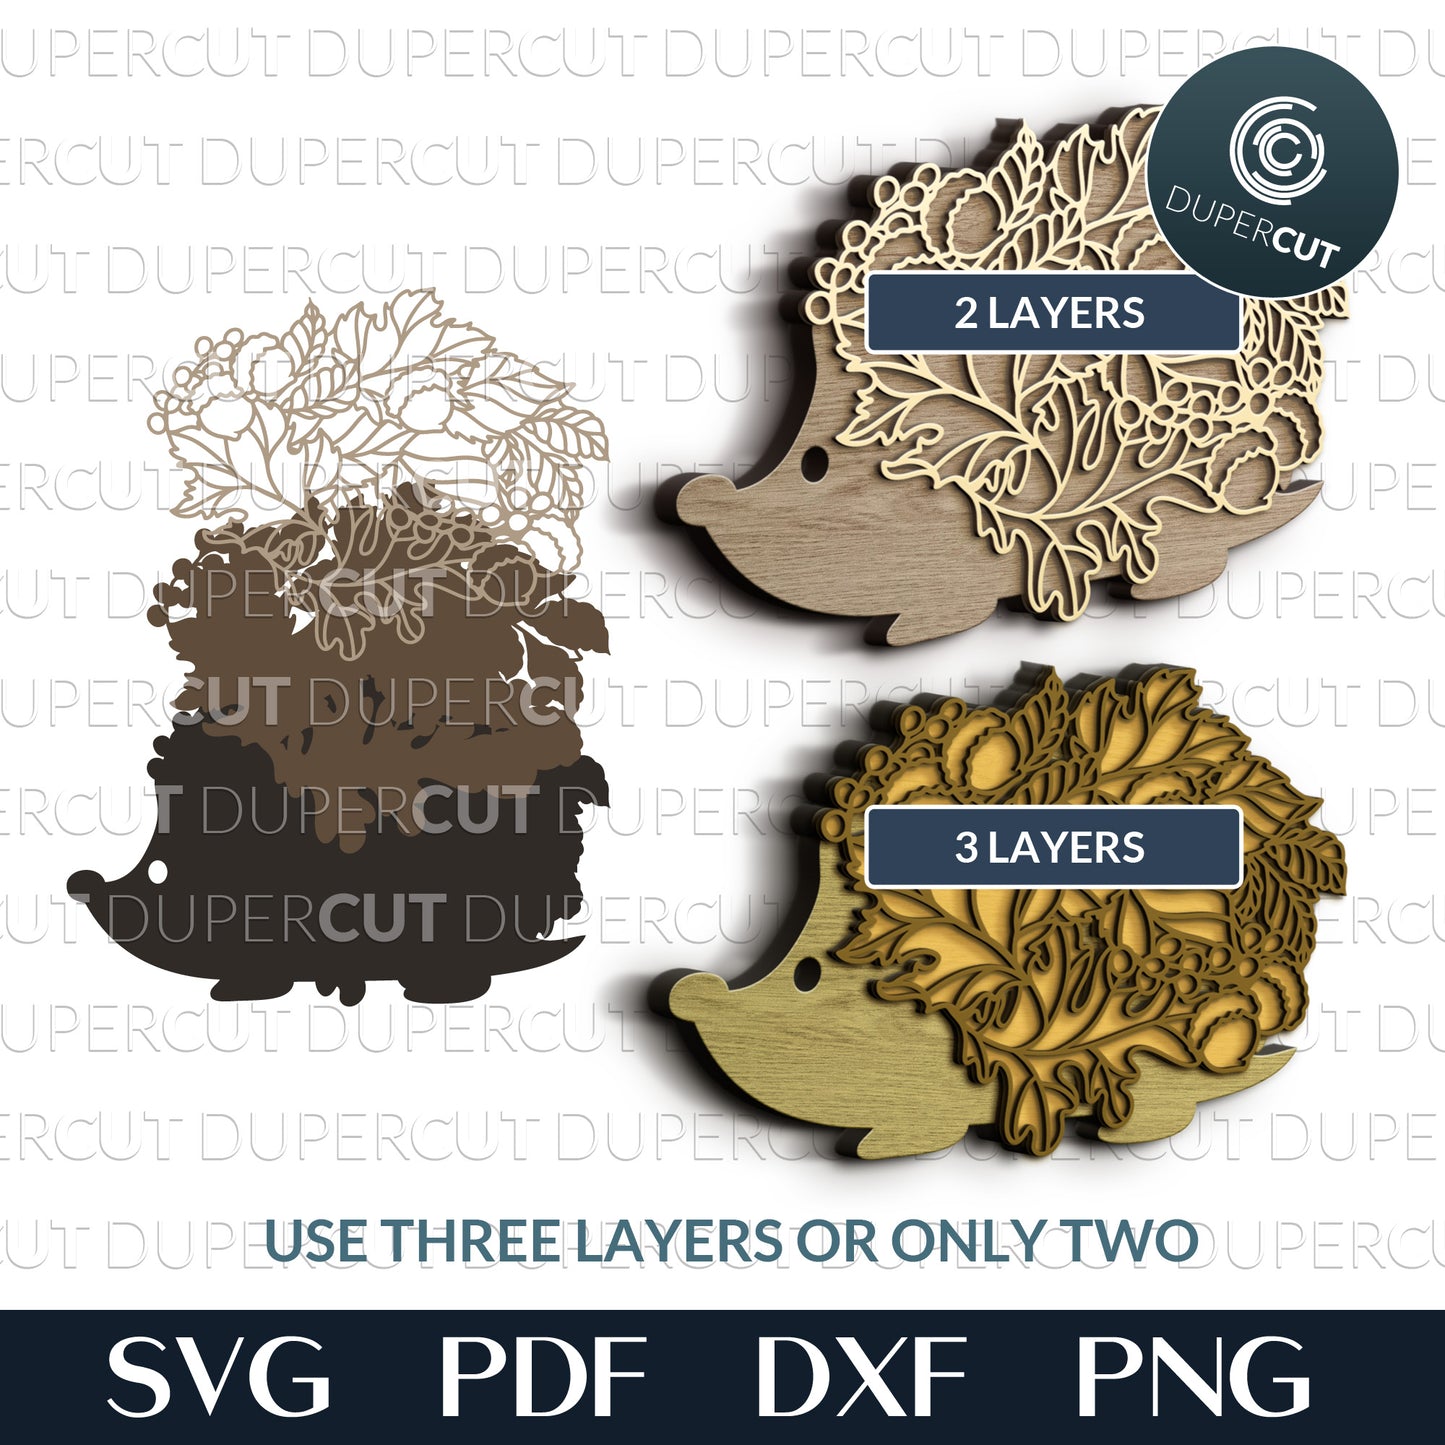 Hedgehog with leaves and acorns - multi-layer cut files SVG PDF DXF template for Glowforge, Cricut, Silhouette cameo, CNC plasma machines